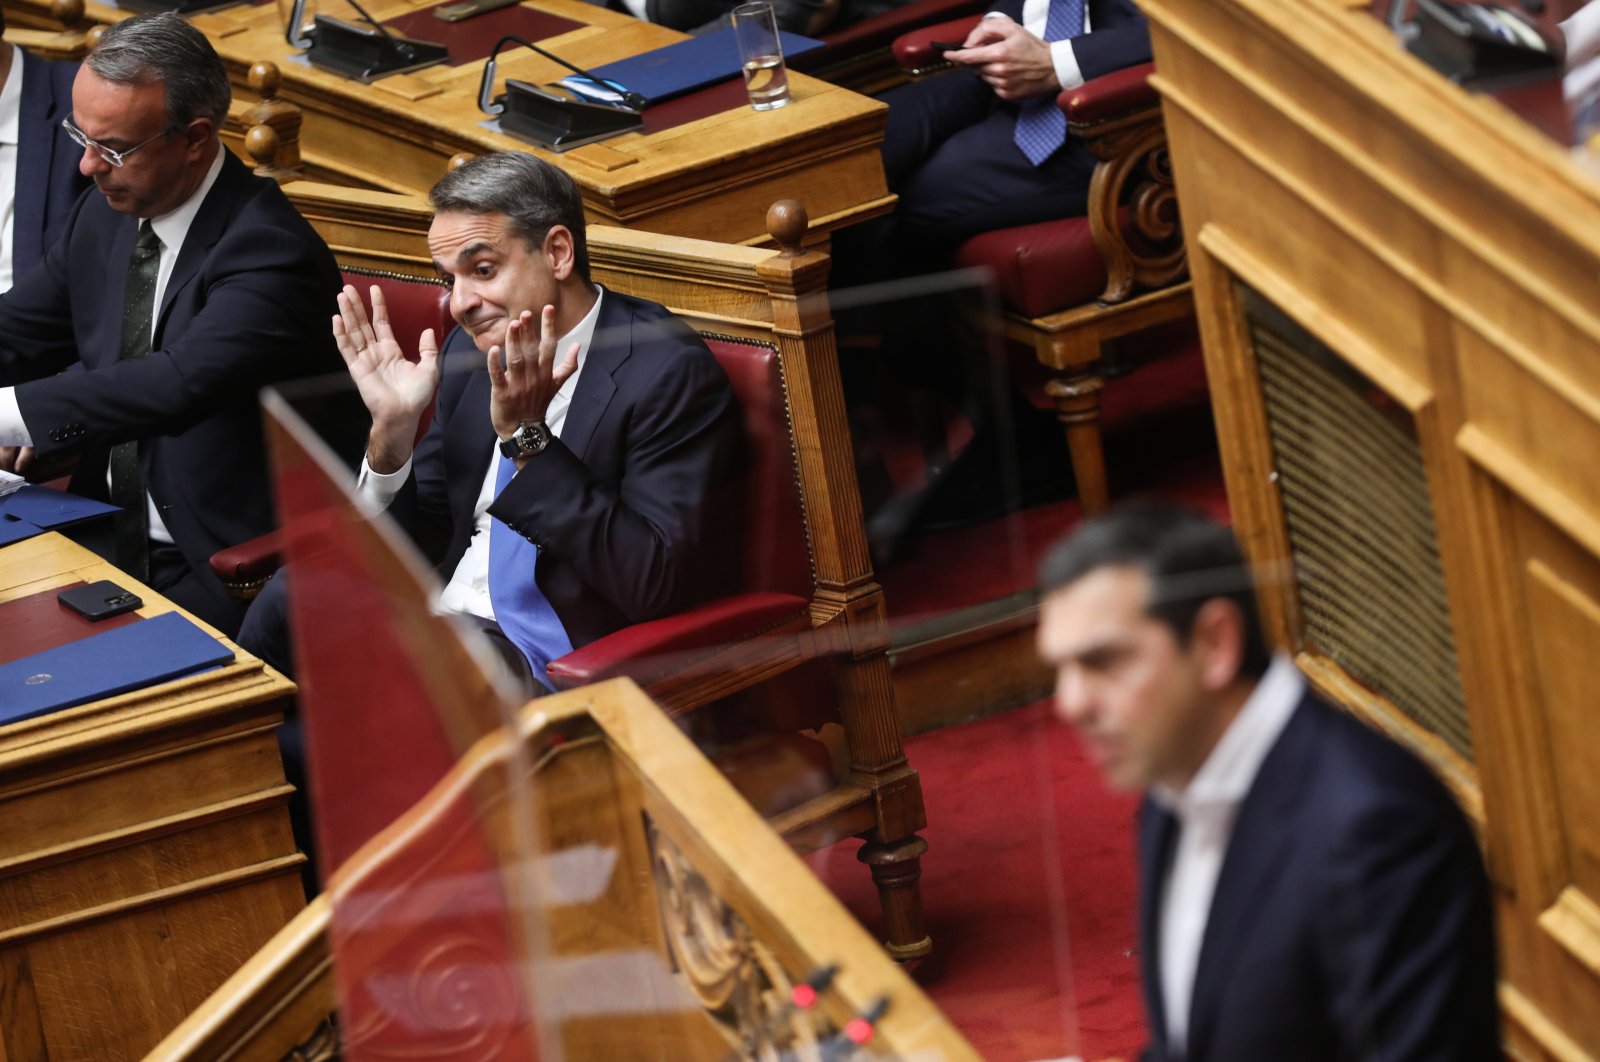 Greek Prime Minister Kyriakos Mitsotakis (2-L) reacts as he listens to the speech of Alexis Tsipras (R), leader of the main opposition party Syriza, during a parliamentary debate prior to a vote on the 2023 state budget, Athens, Greece, Dec. 17, 2022. (EPA Photo)